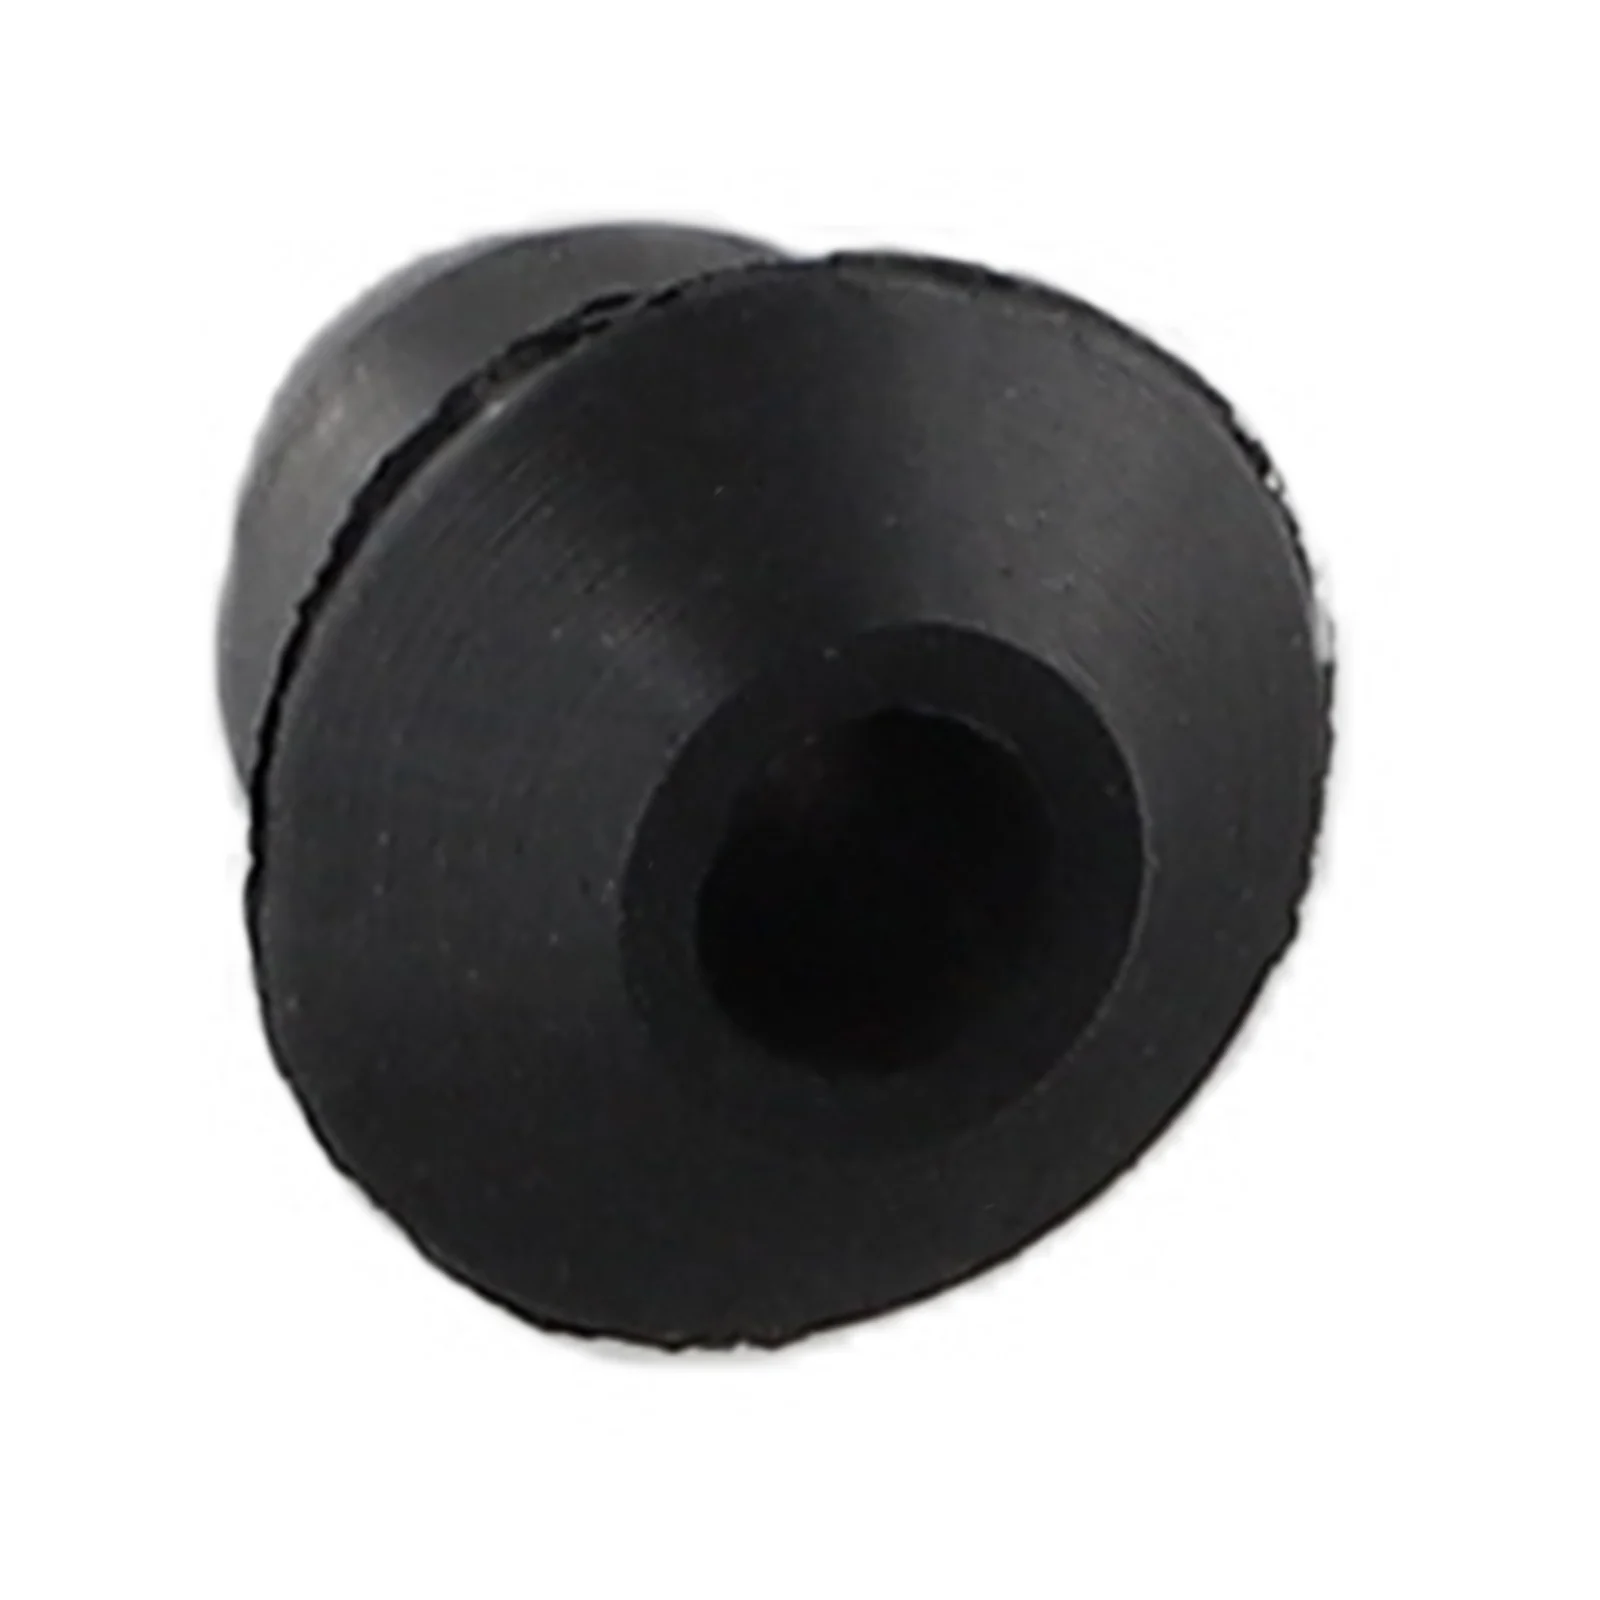 

\\\"Stay Prepared for Fuel Tank Repairs with 5pc Fuel Tank Grommet Fits 1 Hole 9mm Tank Size for Stihl BG75 FS40 HL75 TS460\\\"